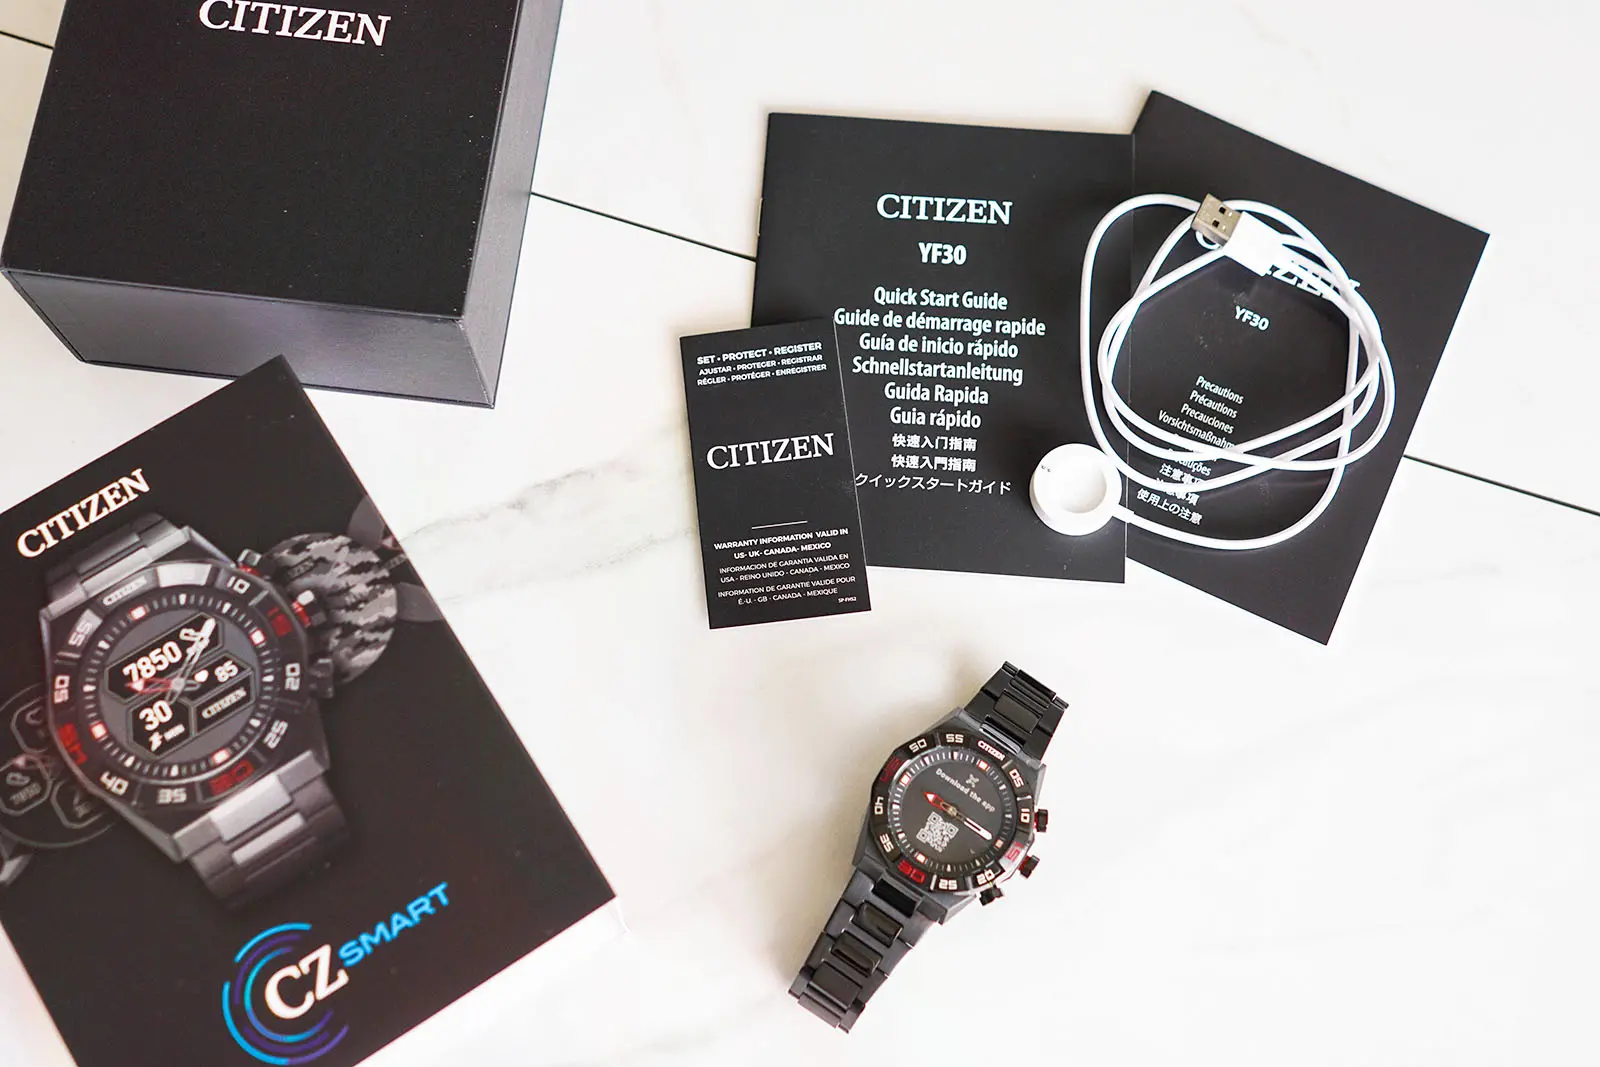 Whats-in-the-box-of-a-Citizen-smart-watch